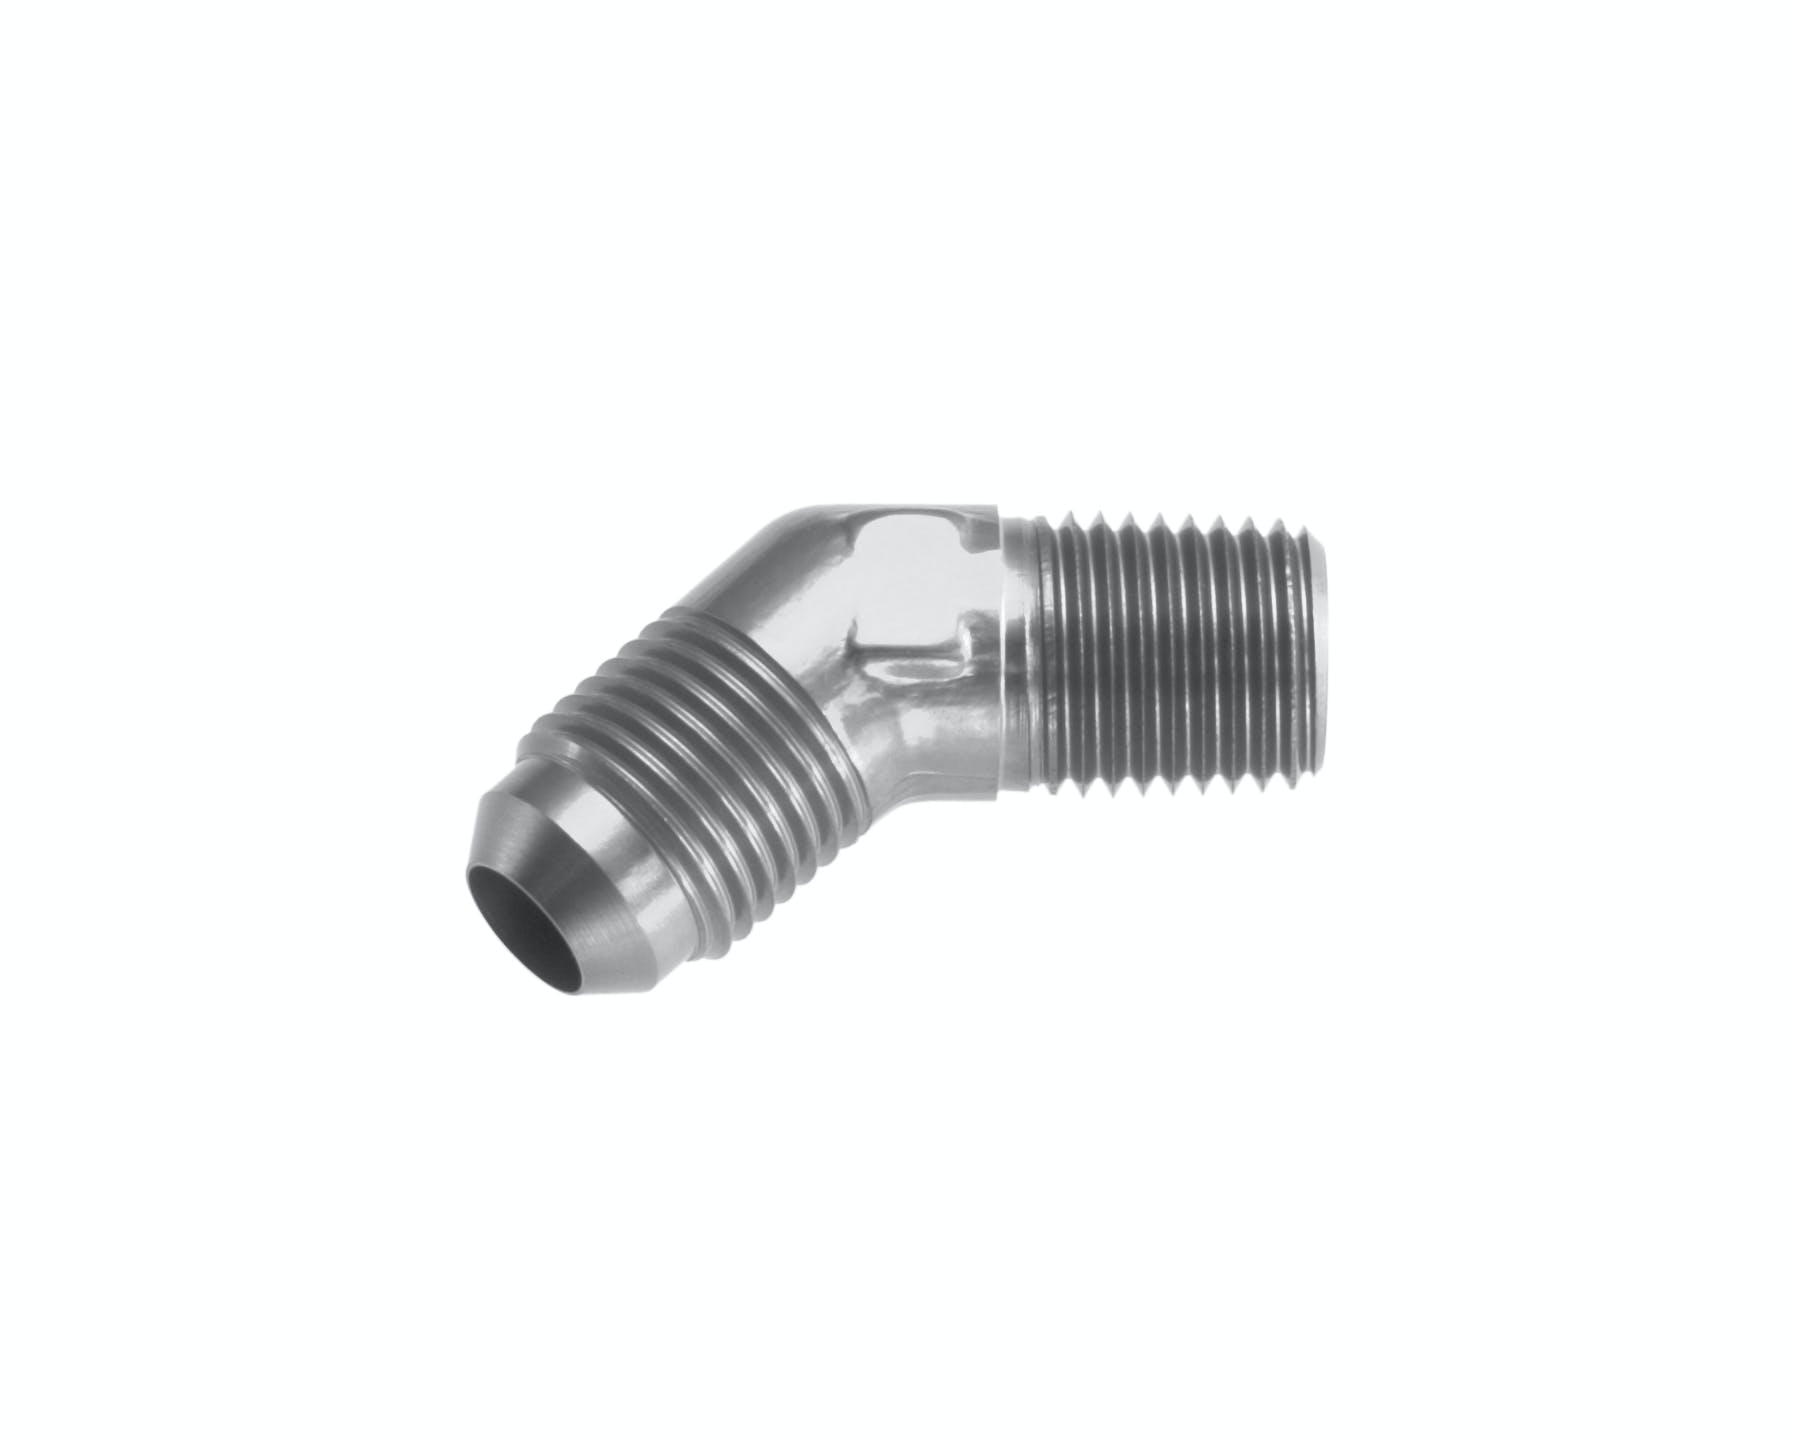 Redhorse Performance 823-08-08-5 -08 45 degree Male adapter to -08 (1/2in) NPT Male - clear